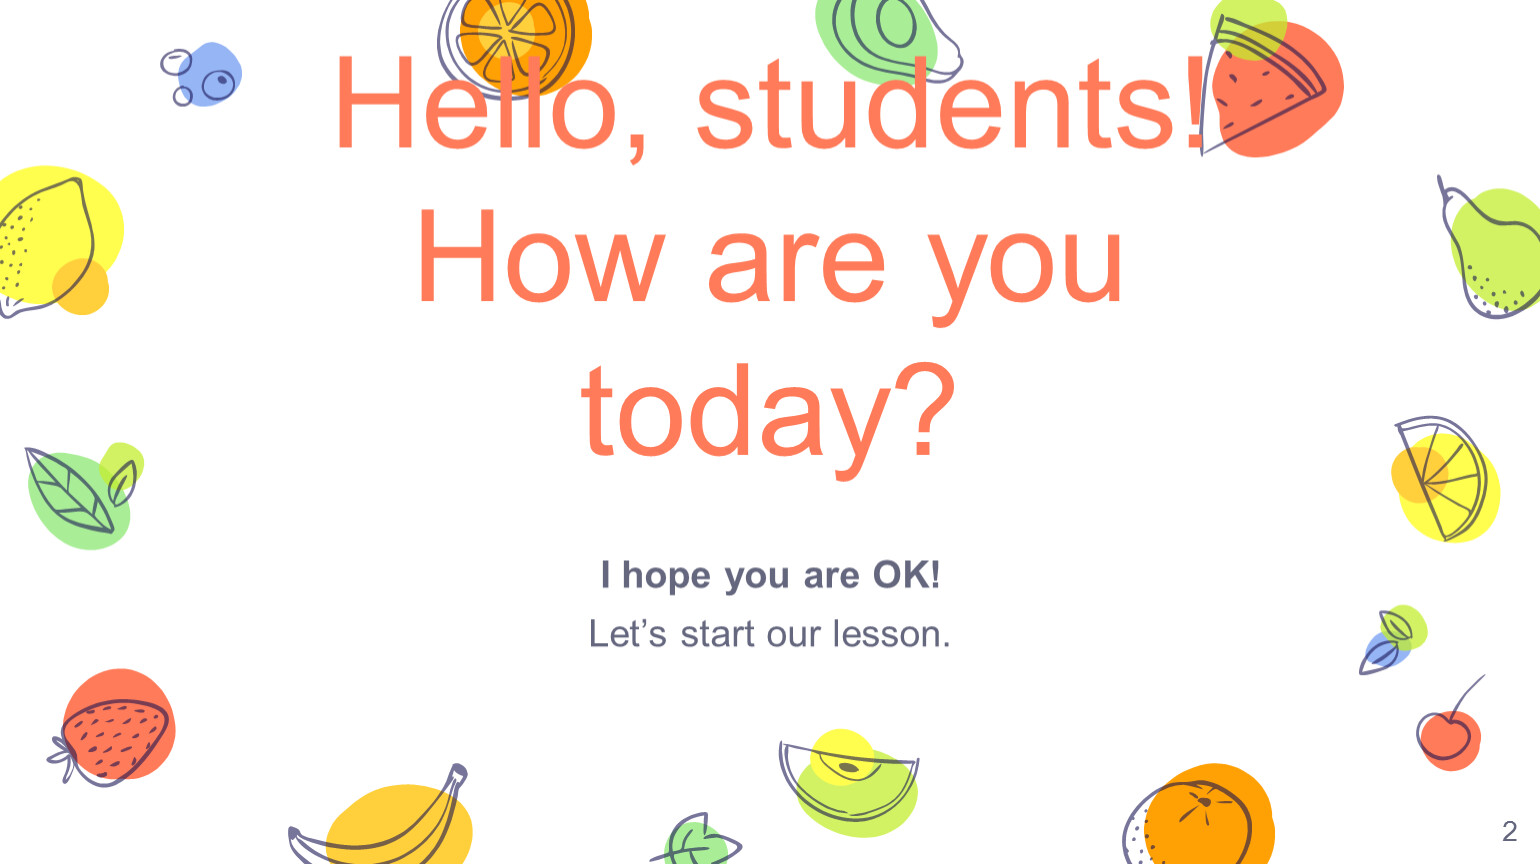 We can start our. How are you картинки. Фраза how are you. Hello students картинки. Картинки how are you today.